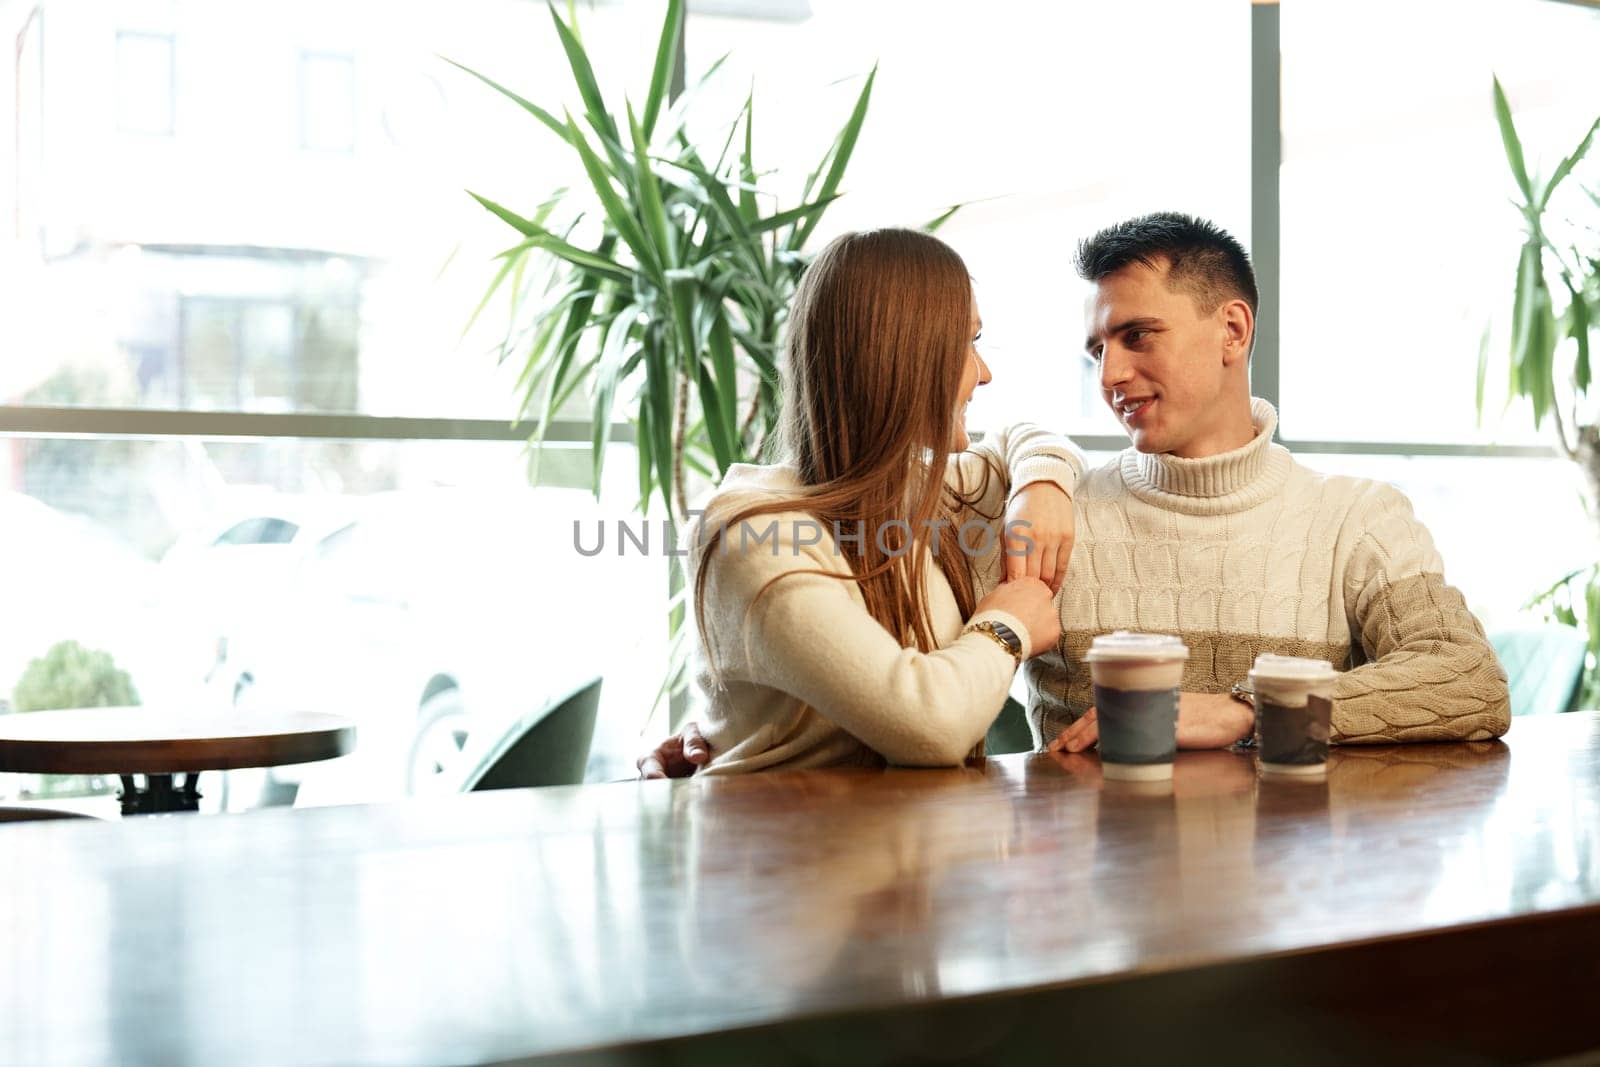 A couple sits close together at a wooden table in a brightly lit cafe, exchanging smiles over steaming cups of perhaps coffee or tea. They appear relaxed and engaged in a cheerful conversation, with natural light filtering through the space creating a warm and inviting atmosphere.